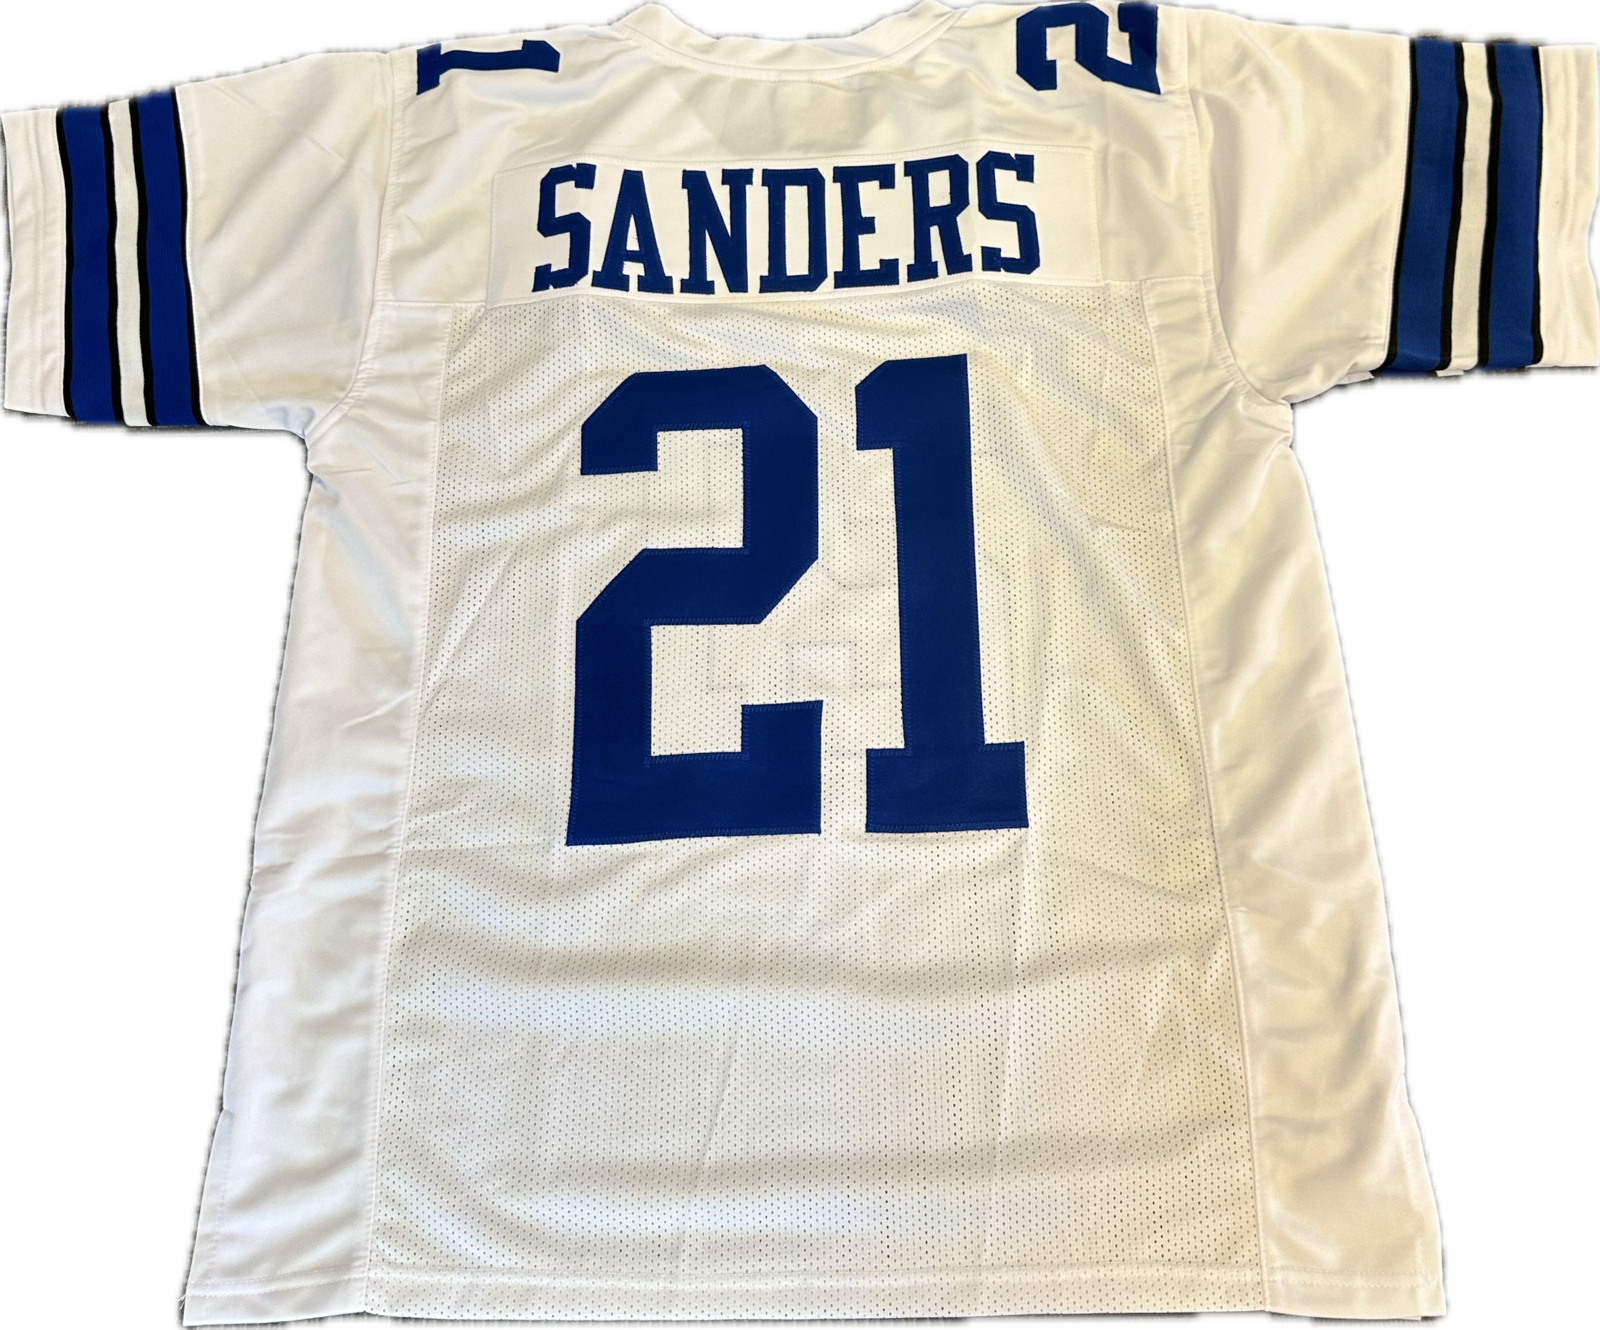 Primary image for  New Custom Stitched Deion Sanders #21 White Jersey